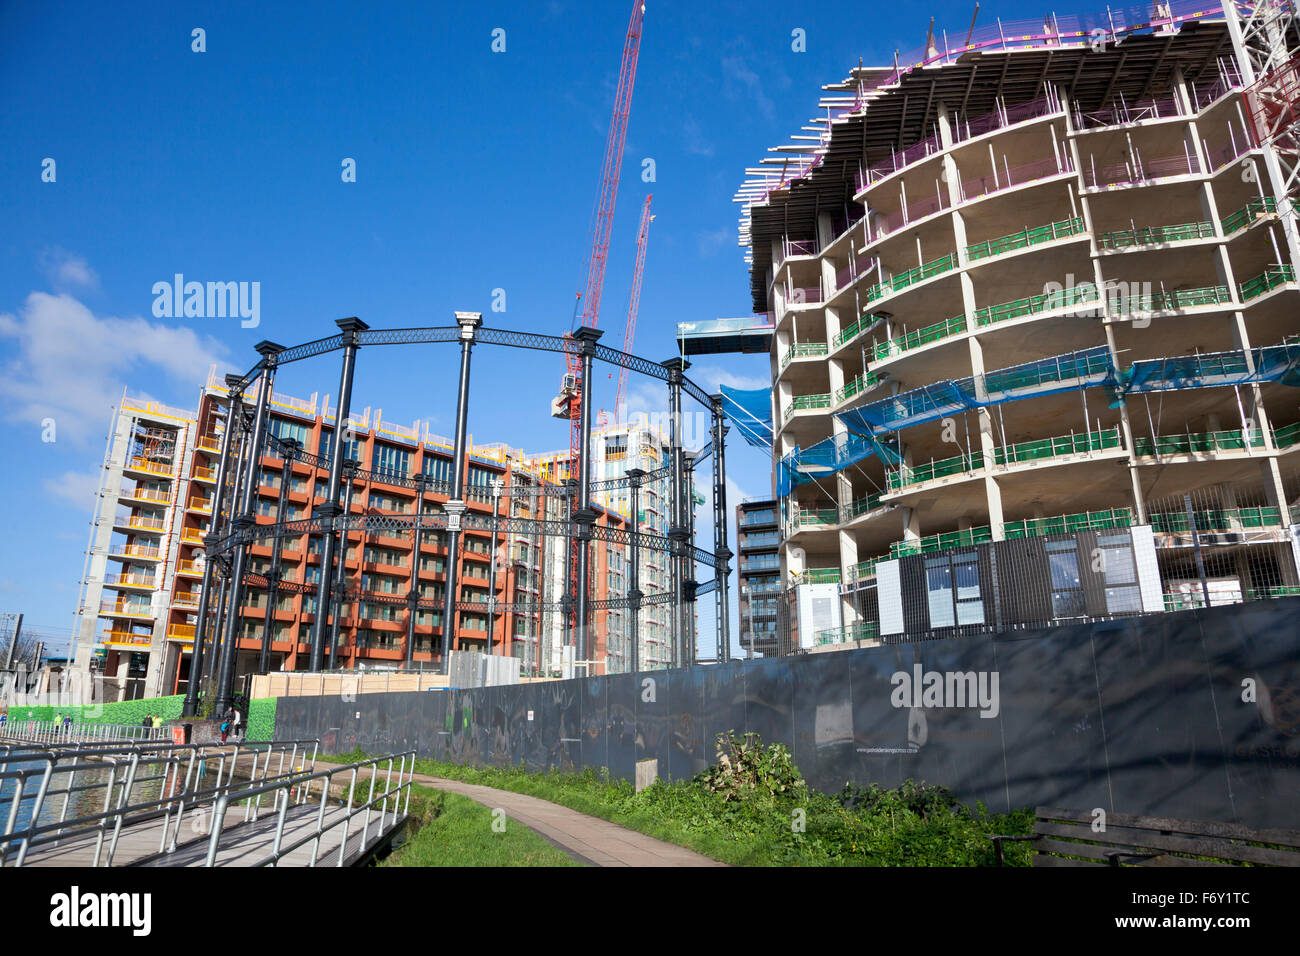 21st November 2015 - Ongoing construction of new Gasholders London residential towers at Kings Cross Stock Photo